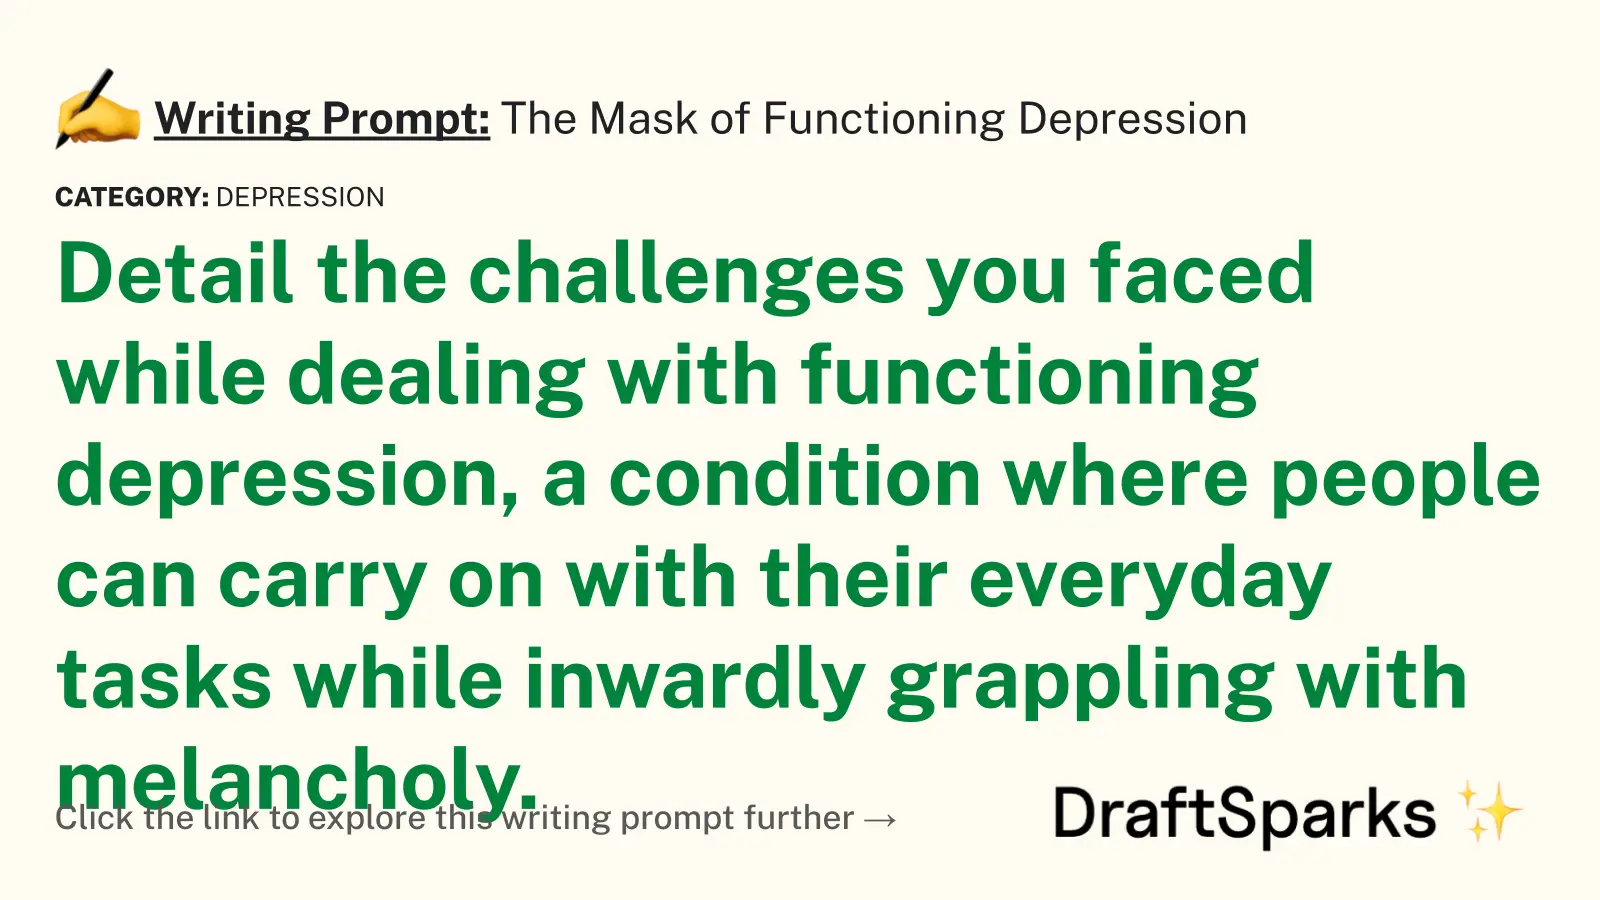 The Mask of Functioning Depression